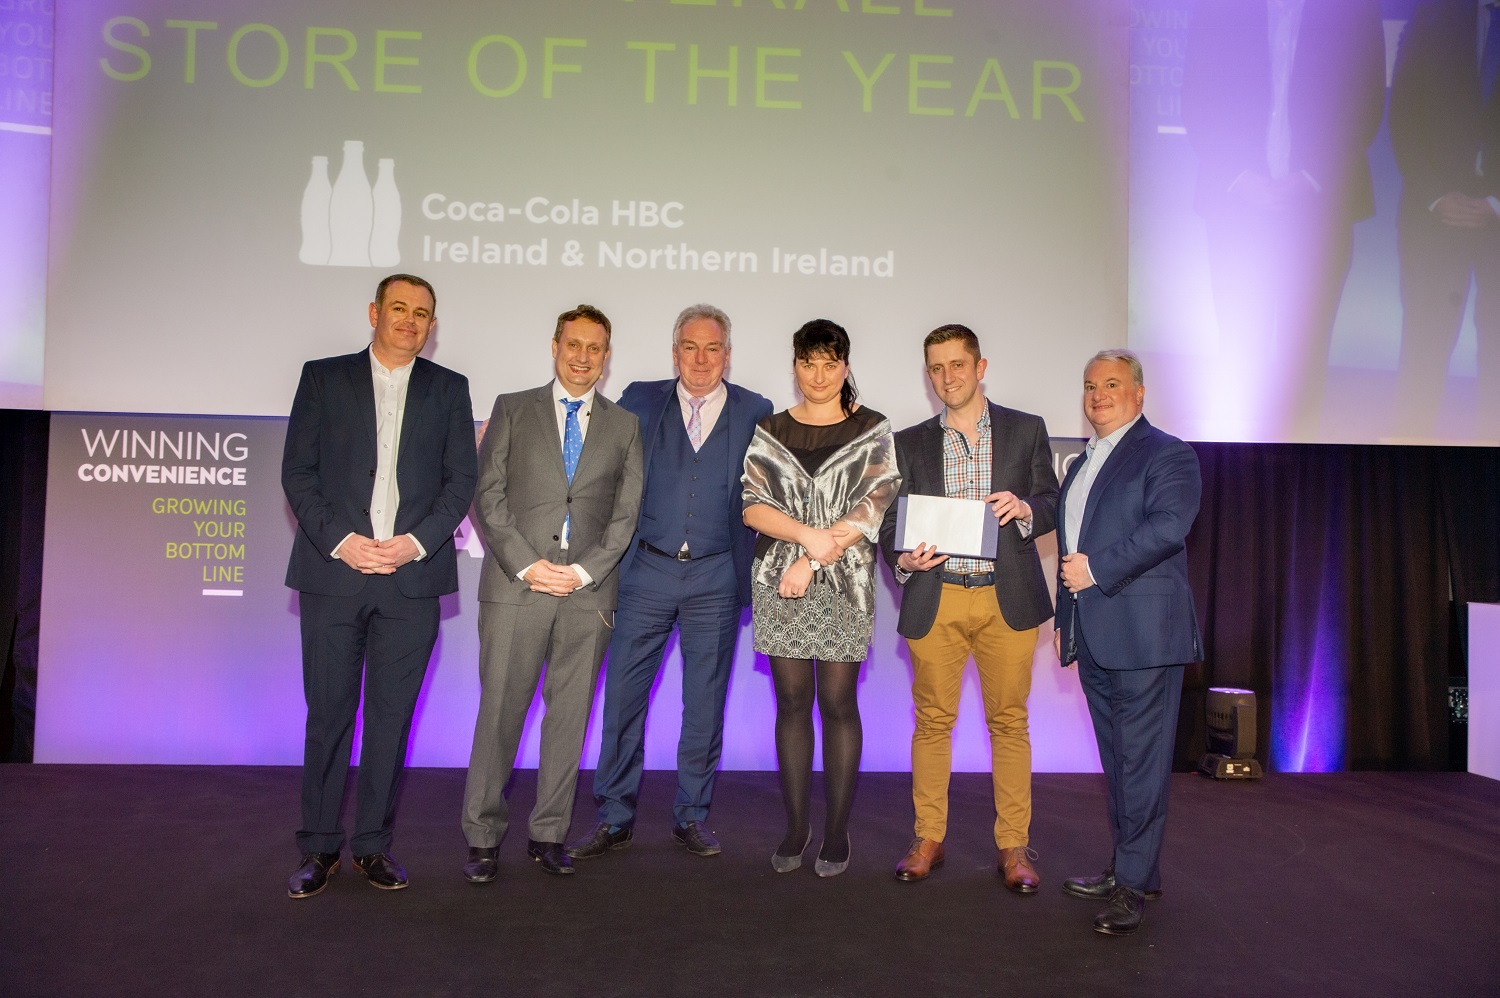 Daybreak Castlerea wins Best Overall Store of the Year